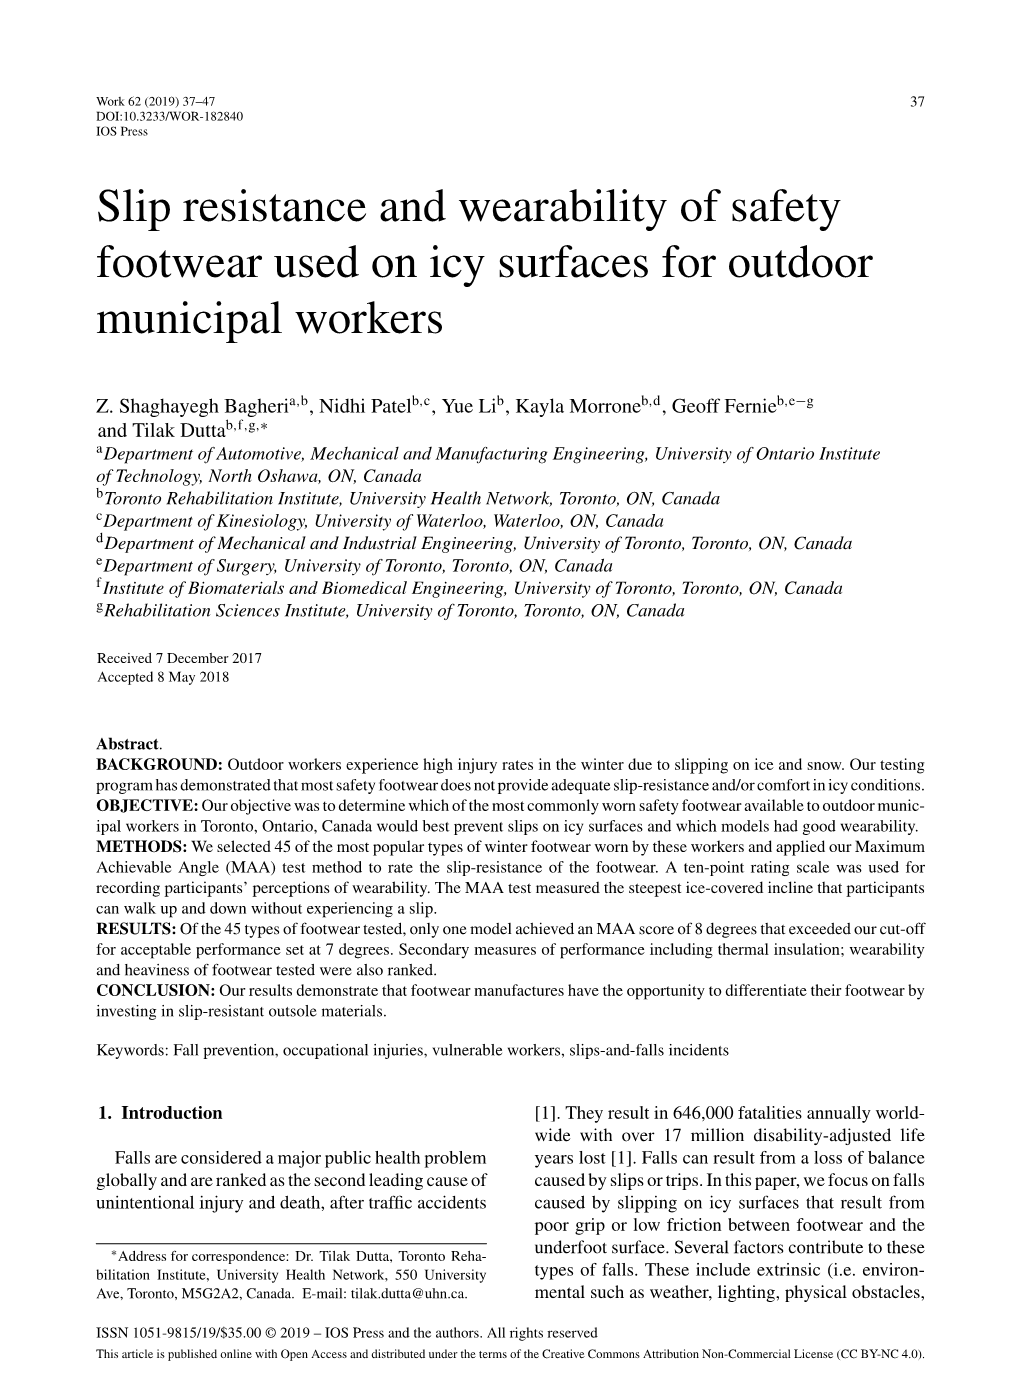 Slip Resistance and Wearability of Safety Footwear Used on Icy Surfaces for Outdoor Municipal Workers